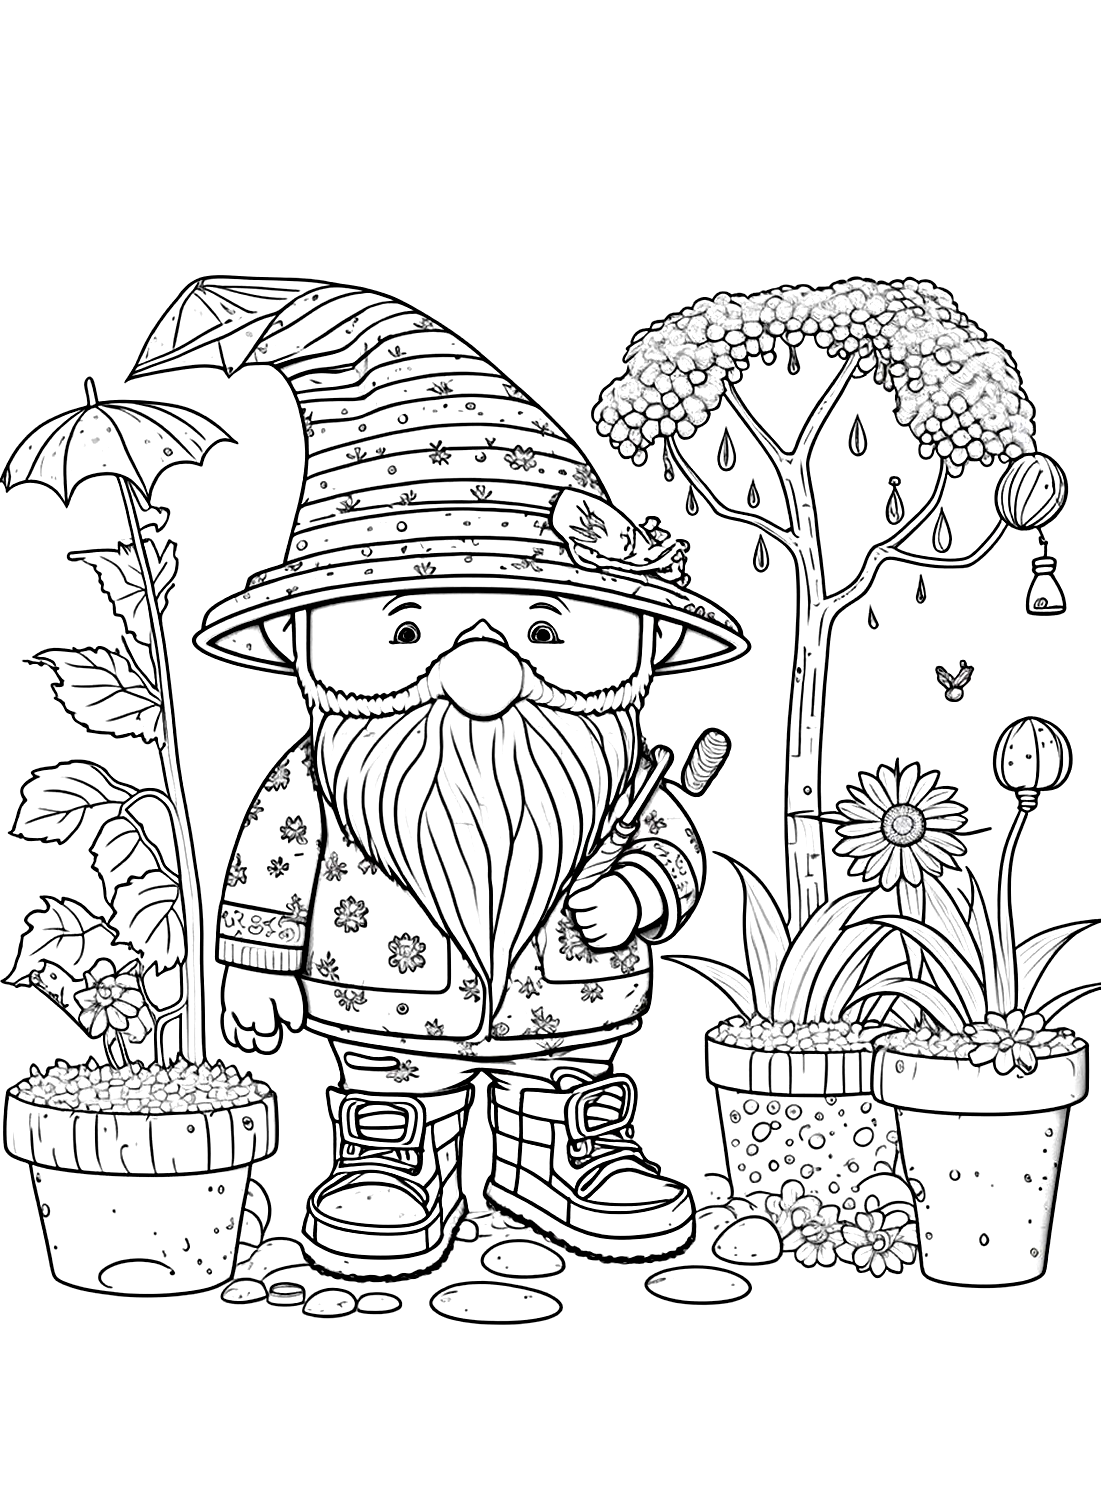 Gnome in garden coloring picture